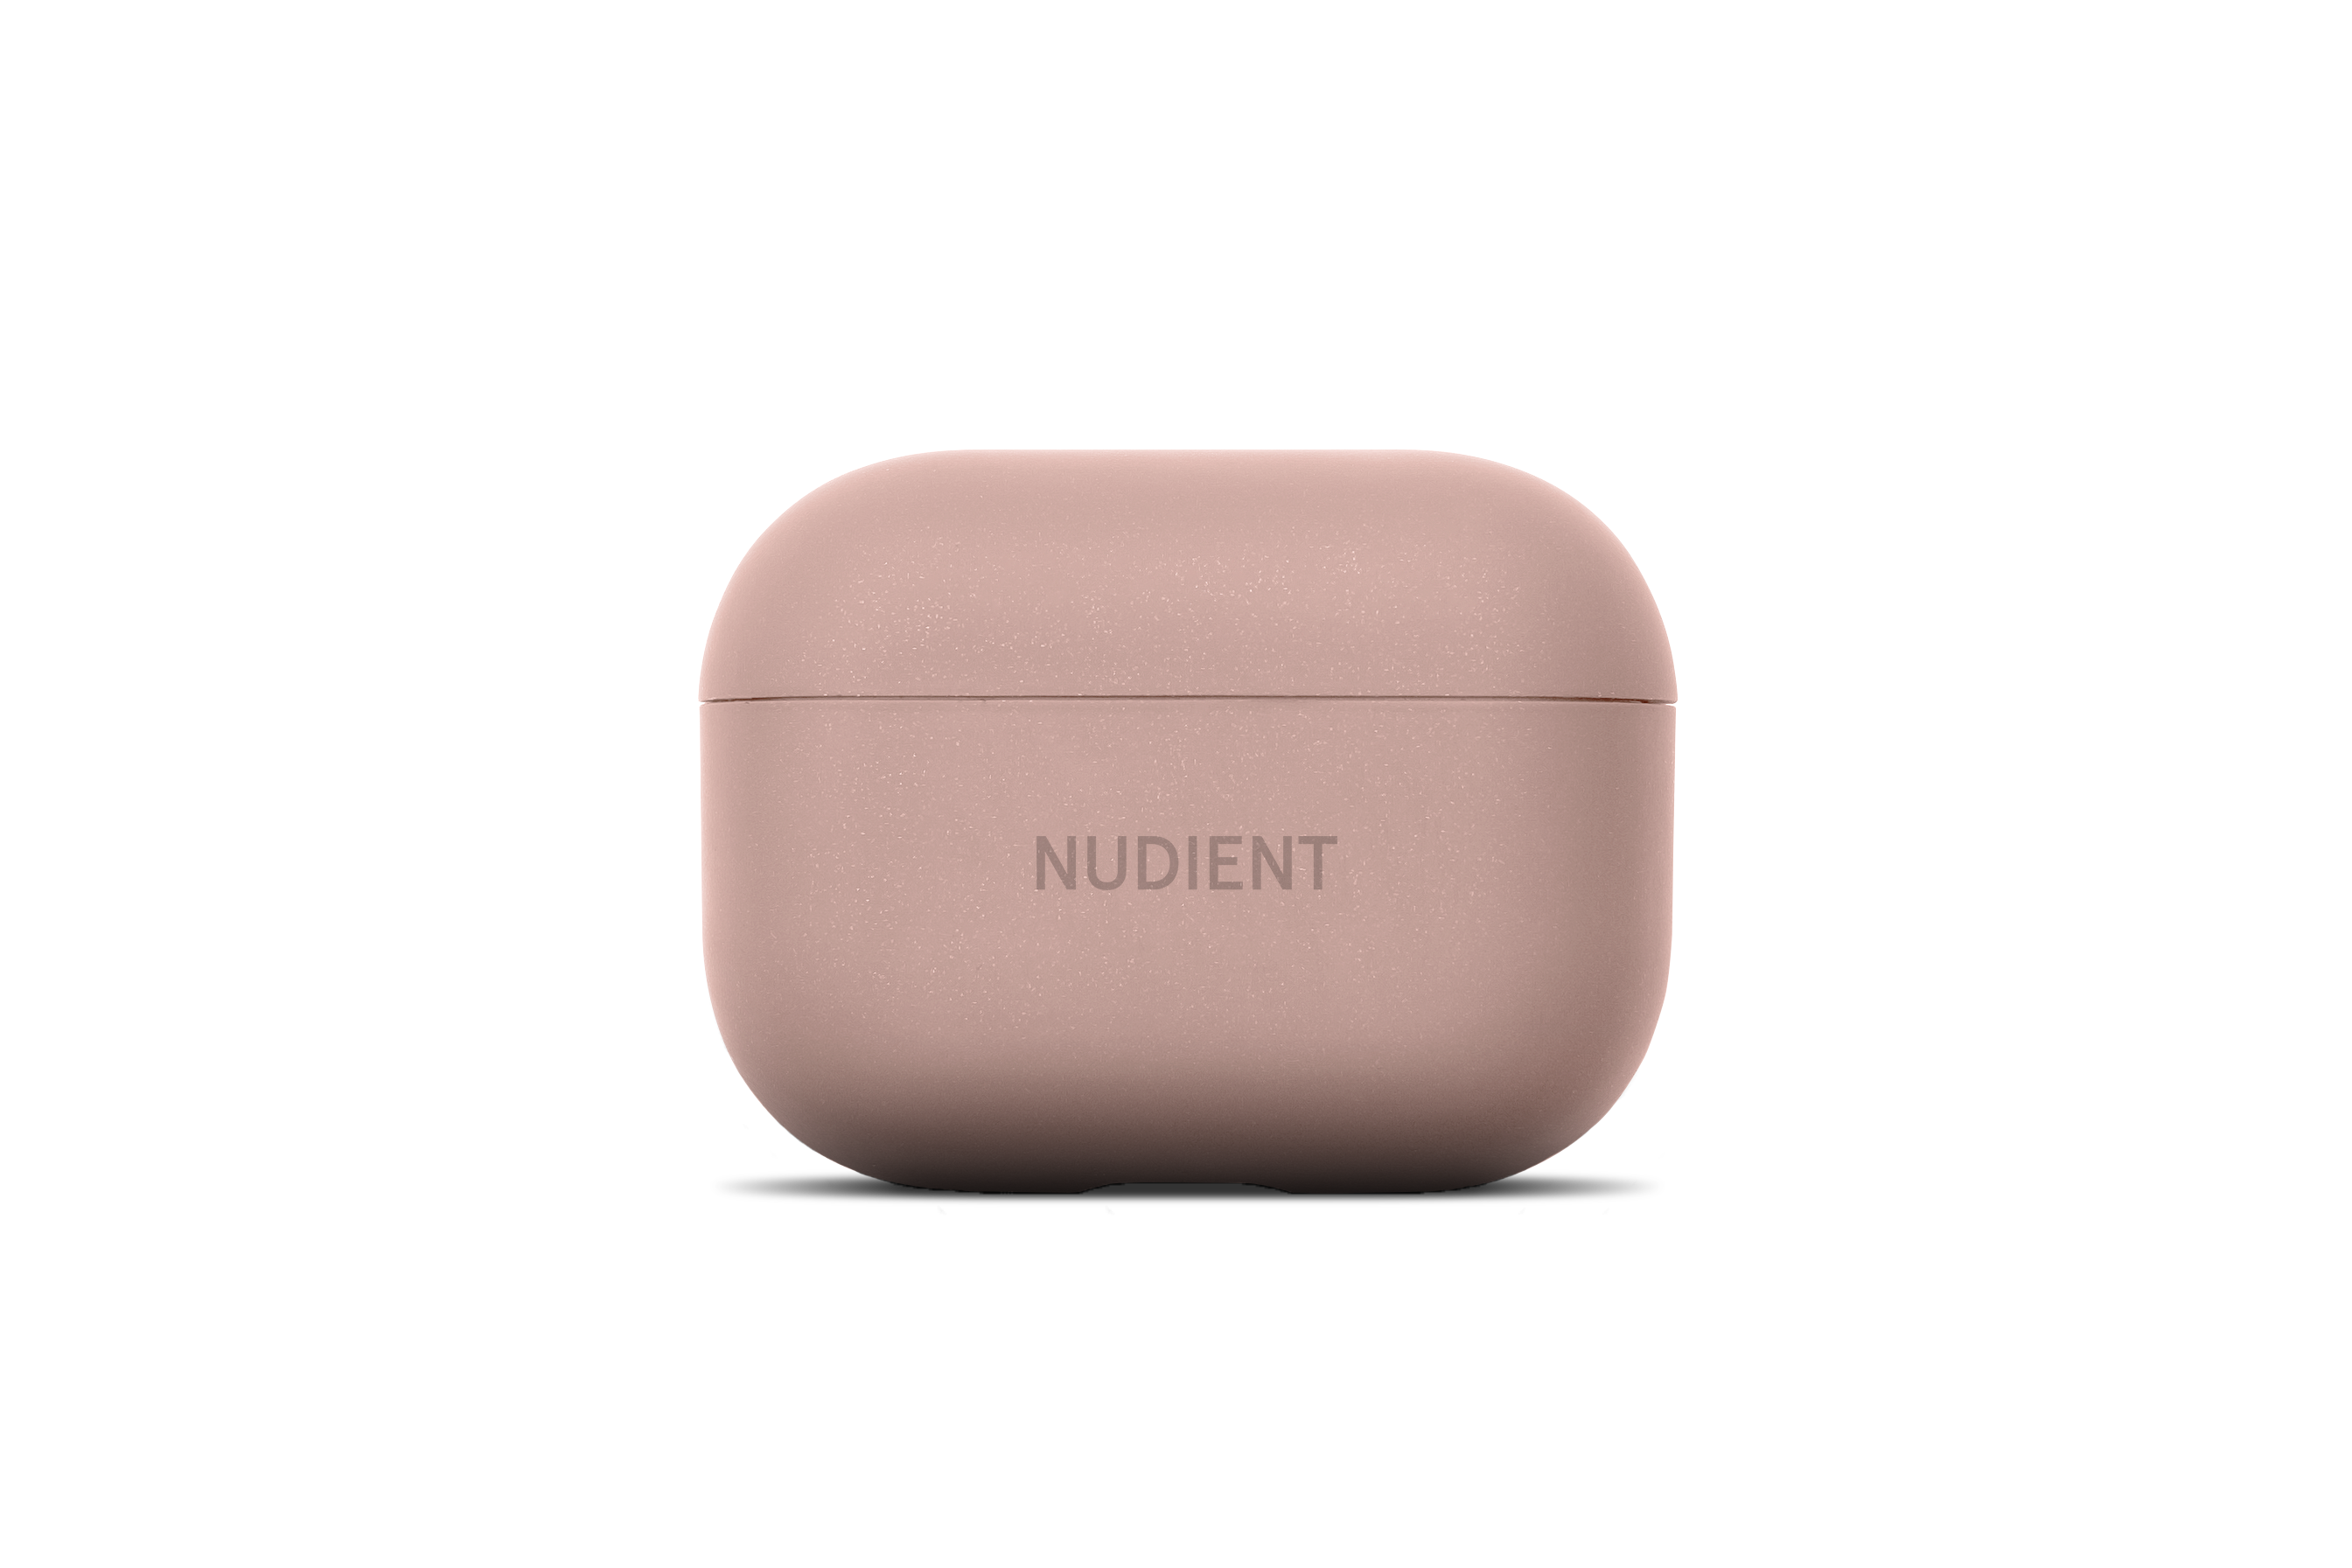 AirPods Pro Case Dusty Pink